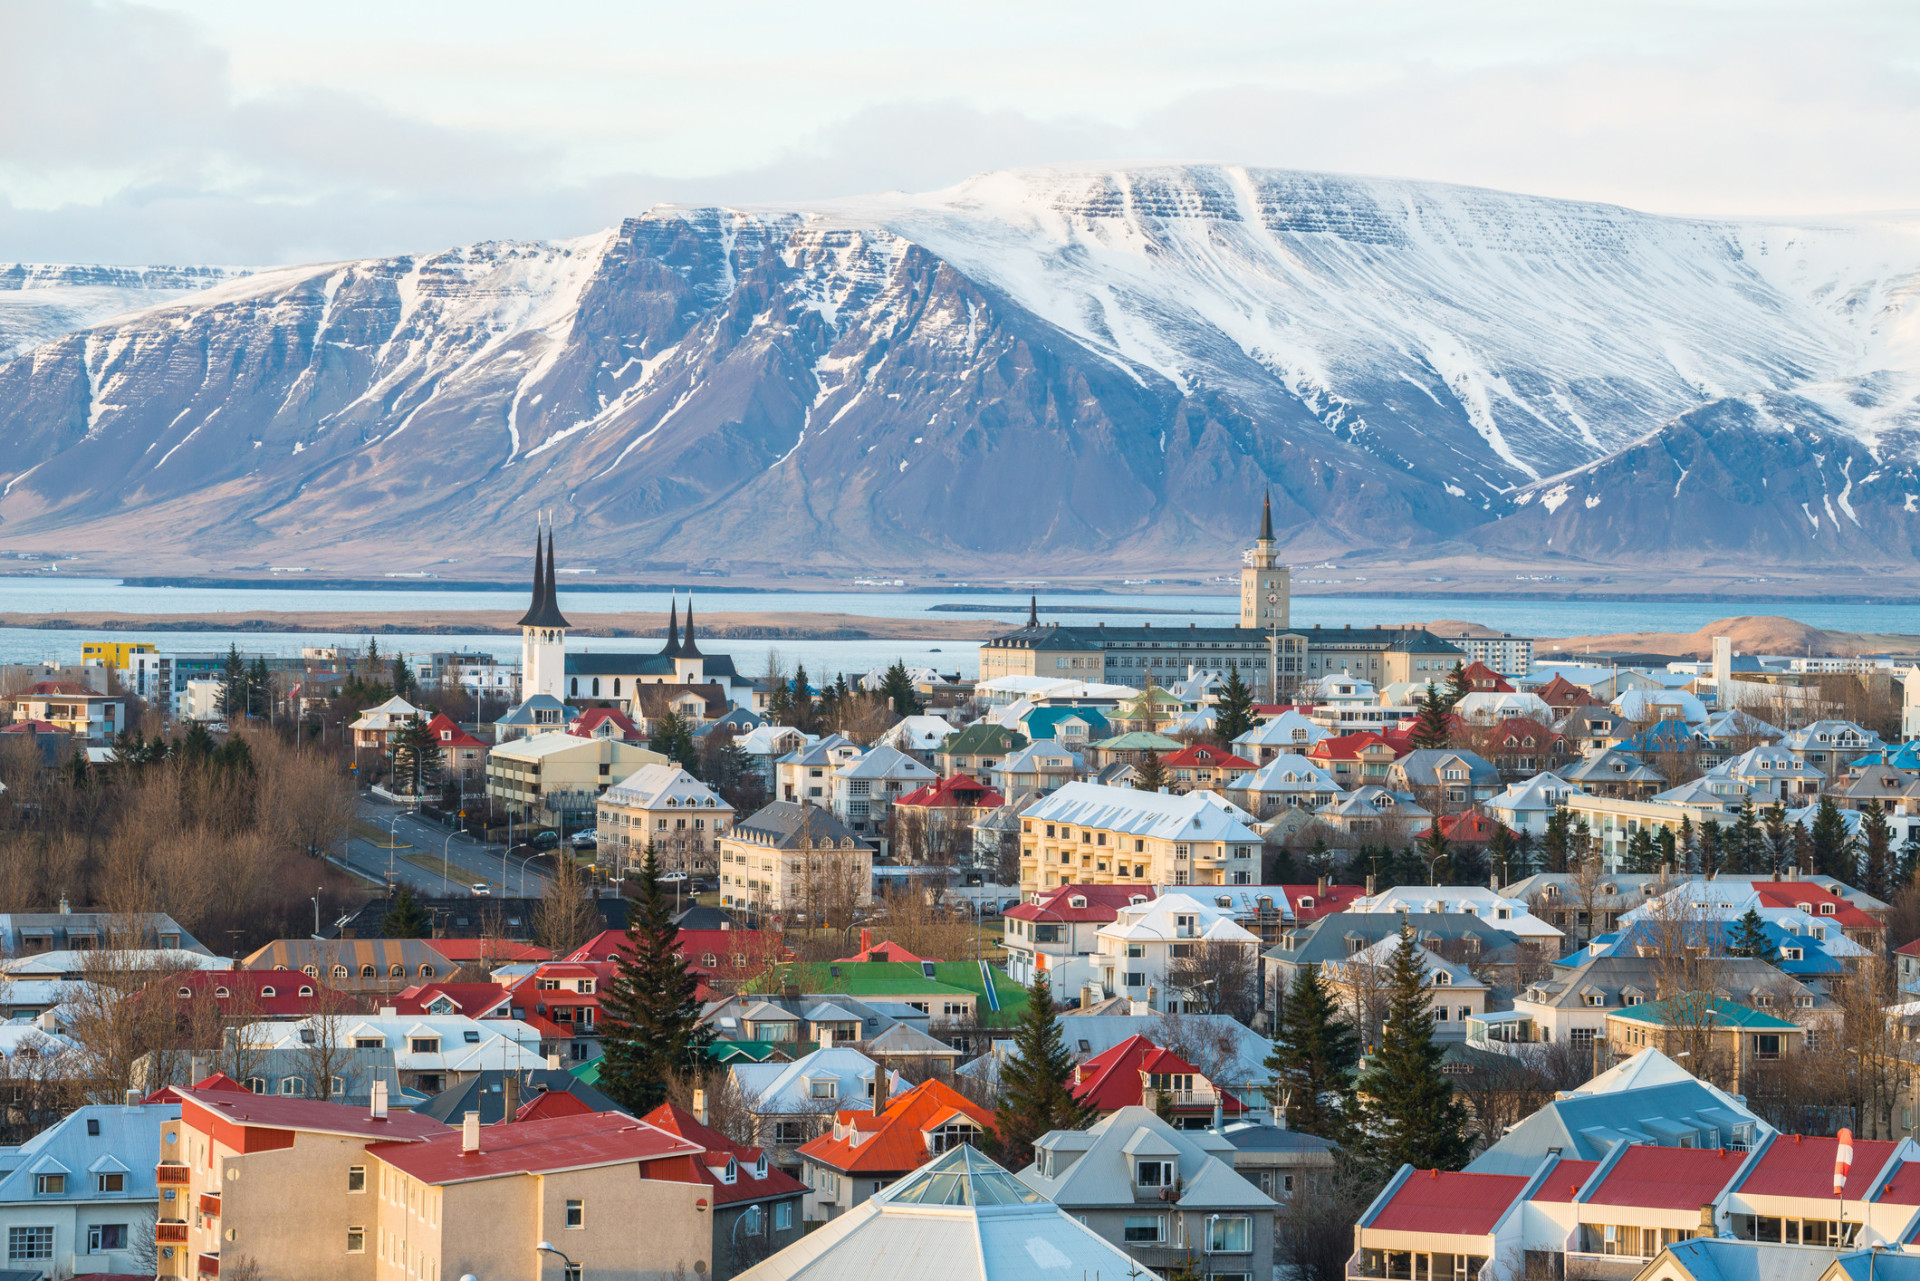 The Icelandic capital is ideal for those who love city life as much as nature. From countless green spaces, to the aurora borealis, to hot water springs, to a modern capital with all the amenities. Reykjavik has it all.<p>You may also like:<a href="https://www.starsinsider.com/n/441917?utm_source=msn.com&utm_medium=display&utm_campaign=referral_description&utm_content=233123v3en-en"> 20 surprising celebs who practice minimalism</a></p>